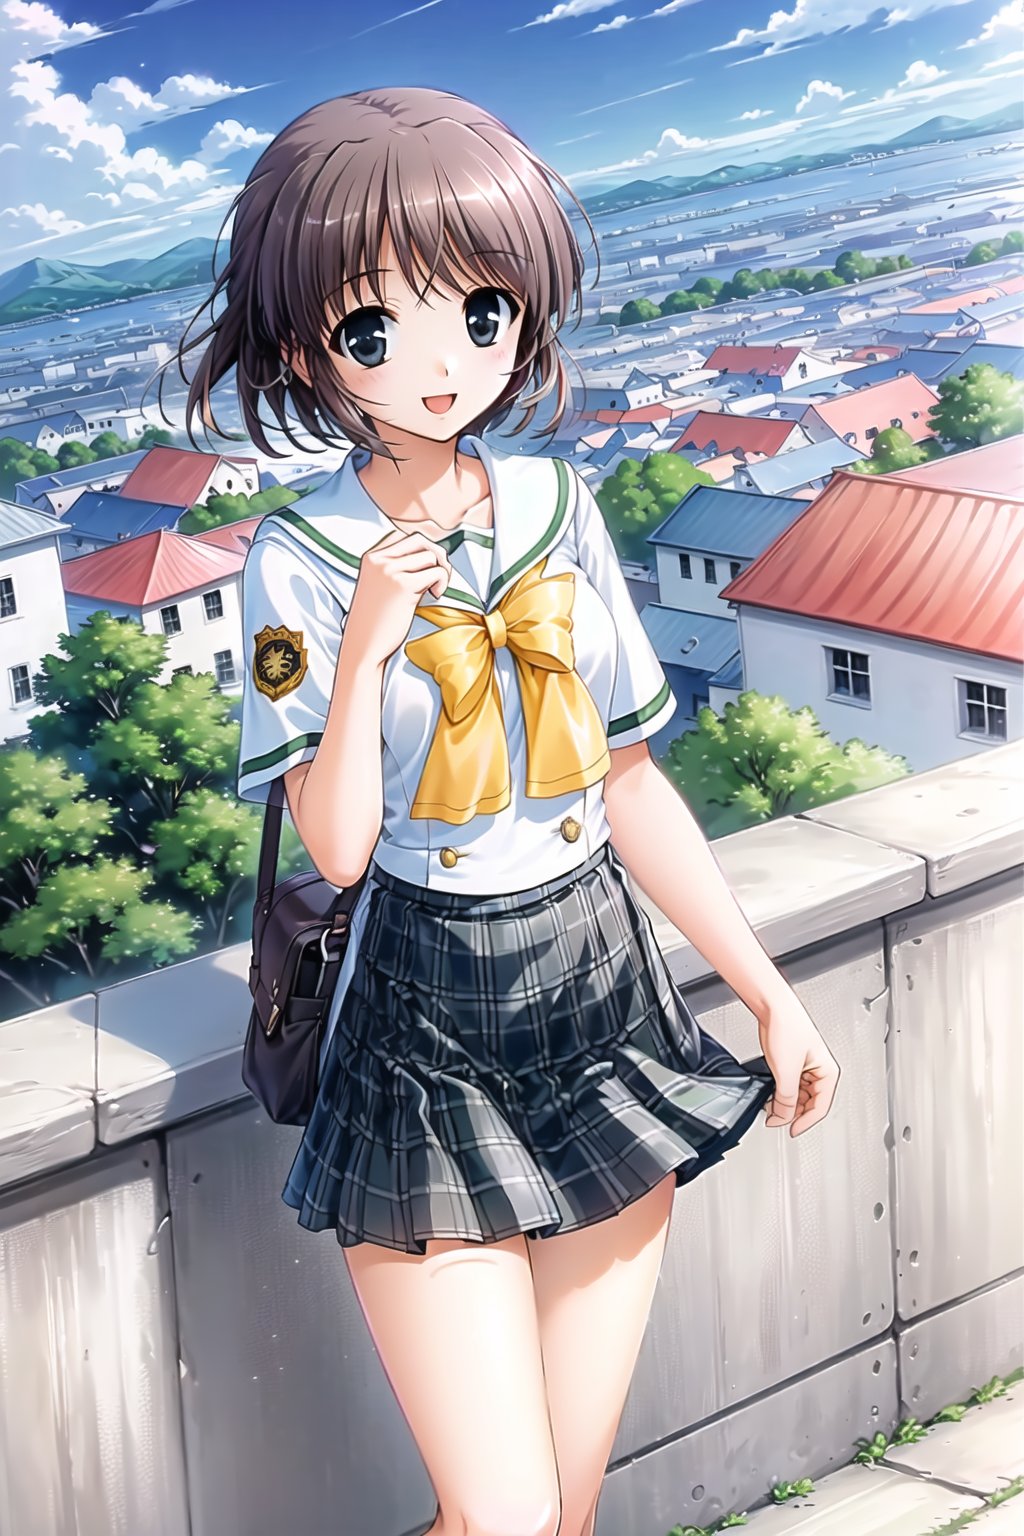 (masterpiece,Best  Quality, High Quality, Best Picture Quality Score: 1.3), (Sharp Picture Quality), Brown hair, short hair,Tie hair,White hair ribbon,School uniform,Skirt with checkerboard pattern, best smile,Beautiful scenery, girl standing on a hill, hills overlooking the city,alone,bule sky,mini_skirt